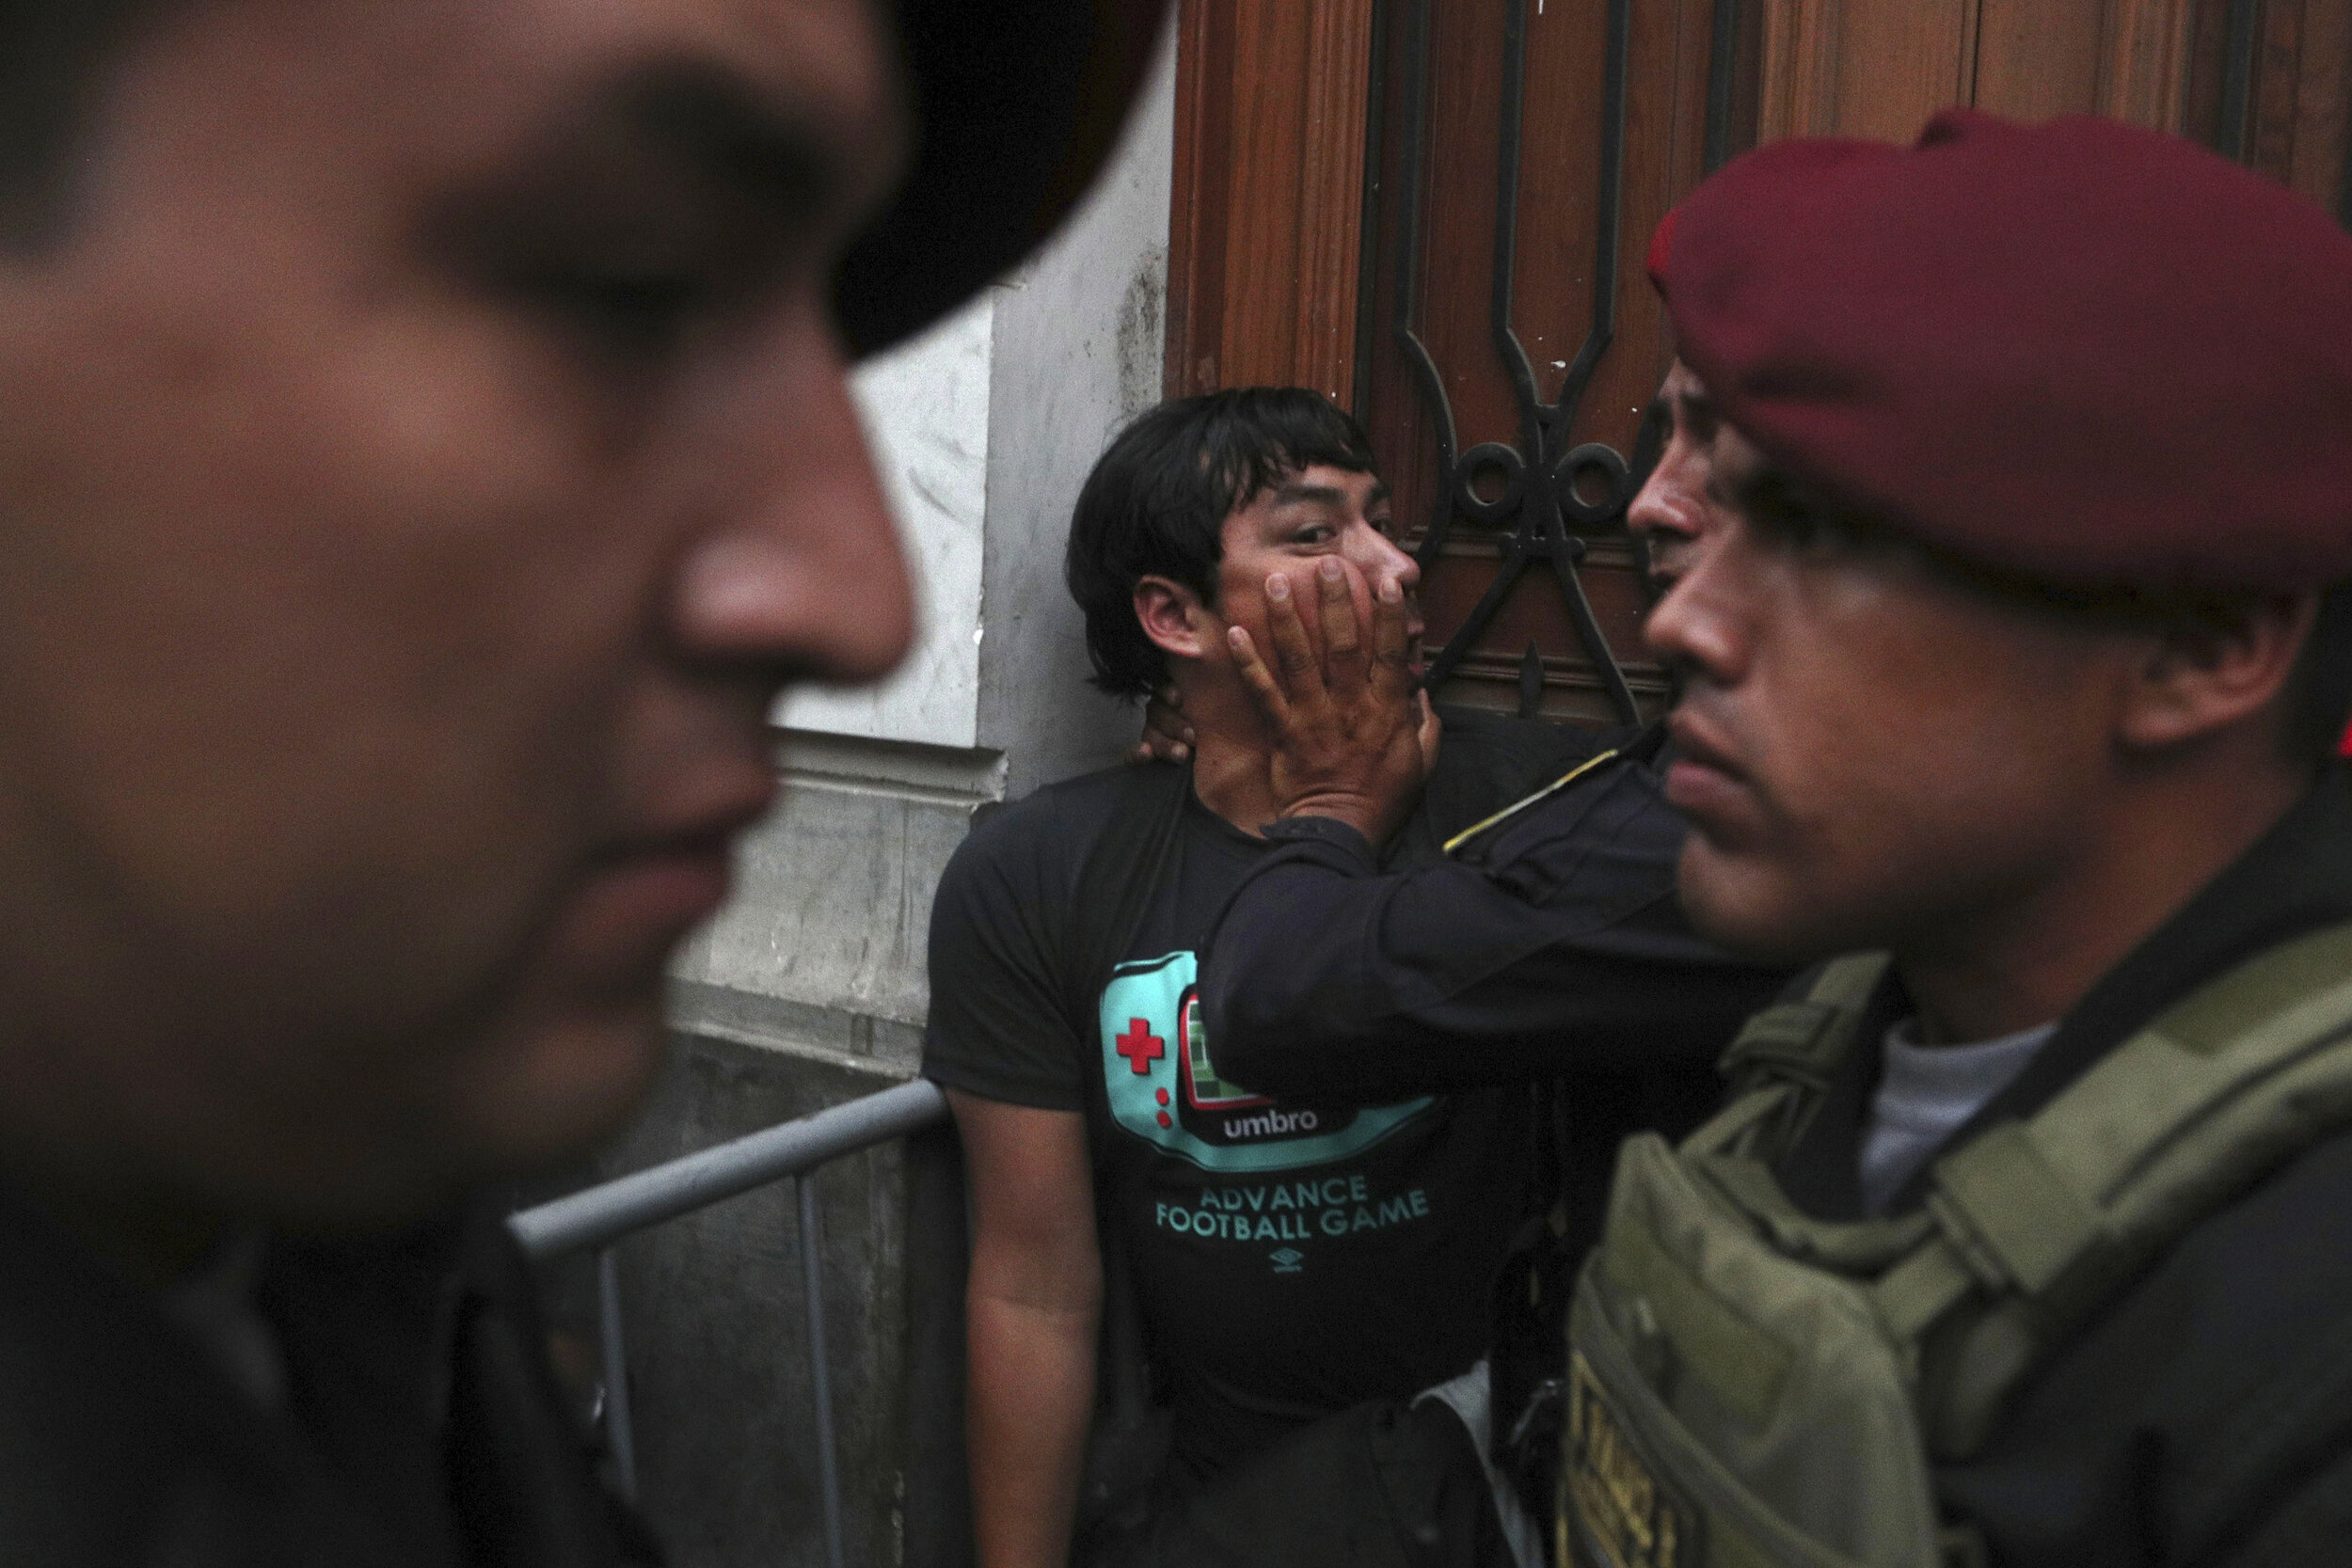  A supporter of Keiko Fujimori, the daughter of Peru's former President Alberto Fujimori and opposition leader, is held back by police officers outside a courtroom in Lima, Peru, Tuesday, Jan. 28, 2020. A Peruvian judge ordered 15 months of preventiv